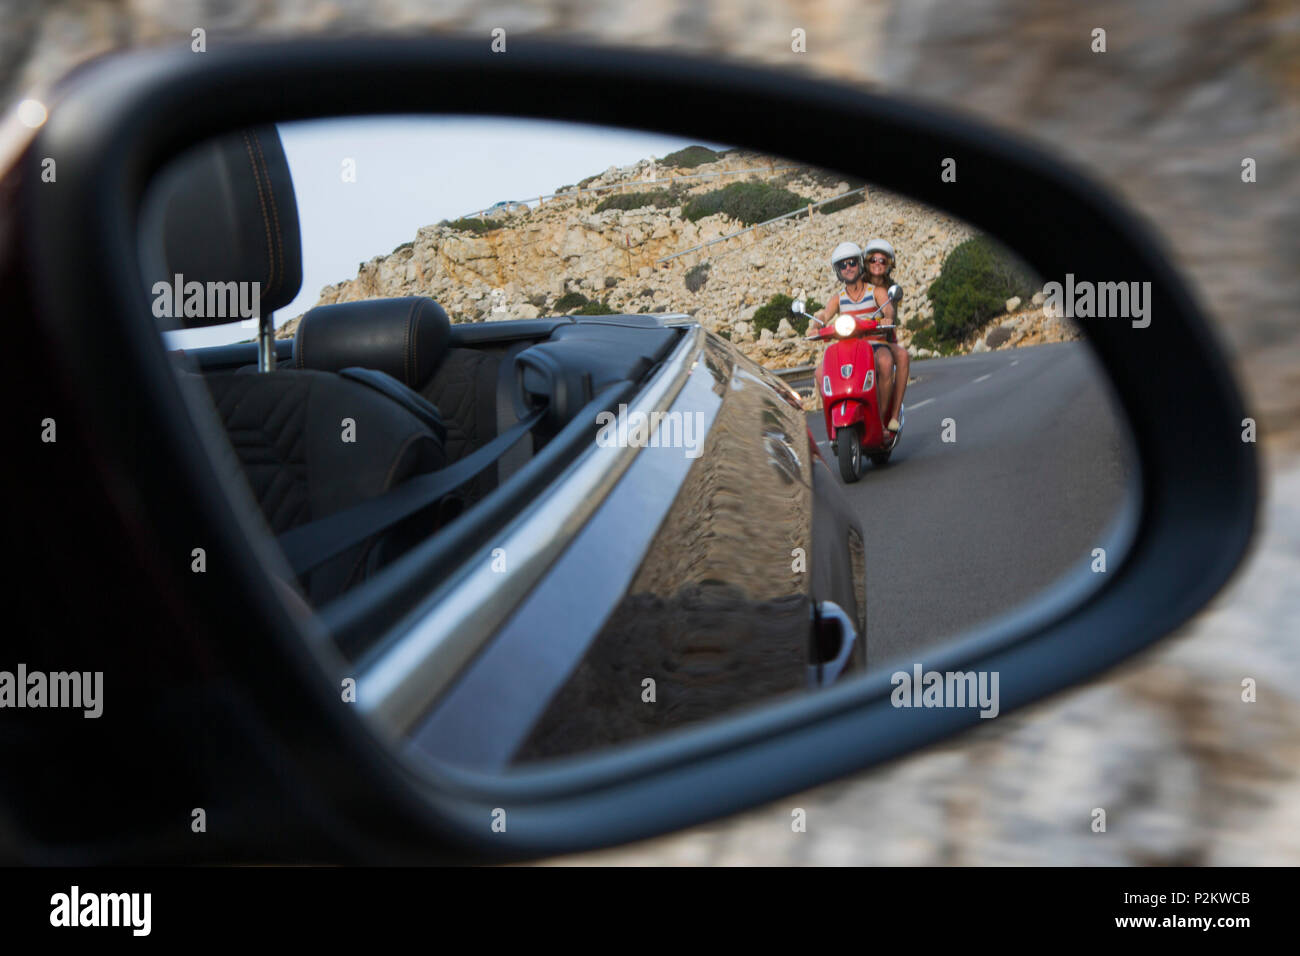 Rear view mirror view of young couple riding a red Vespa scooter on road along Cap de Formentor peninsula with Faro de Formentor Stock Photo